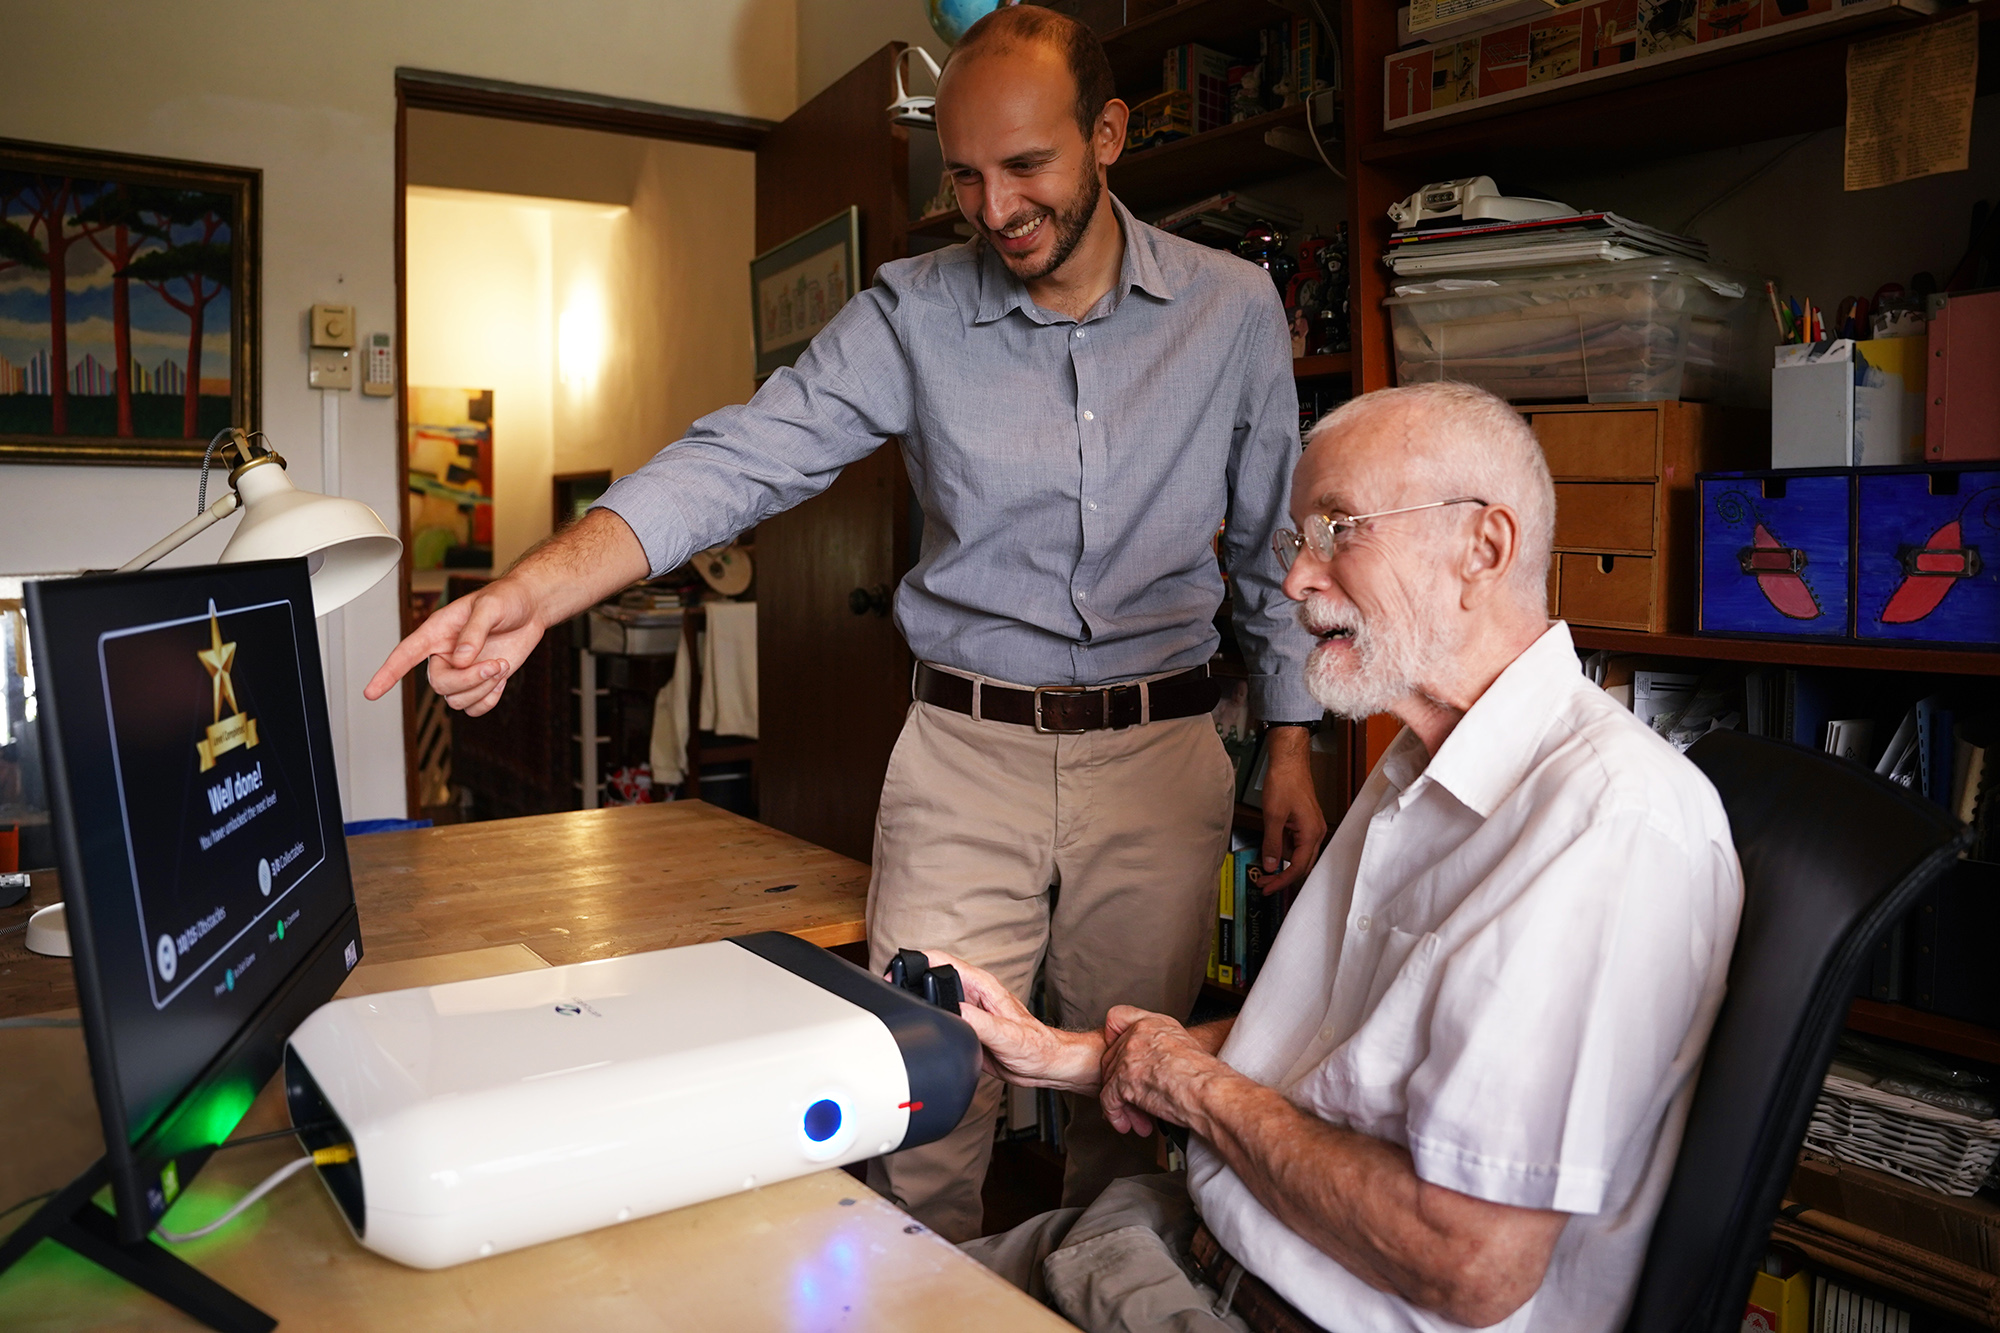 A patient using the ReHandyBot in his home (Singapore).